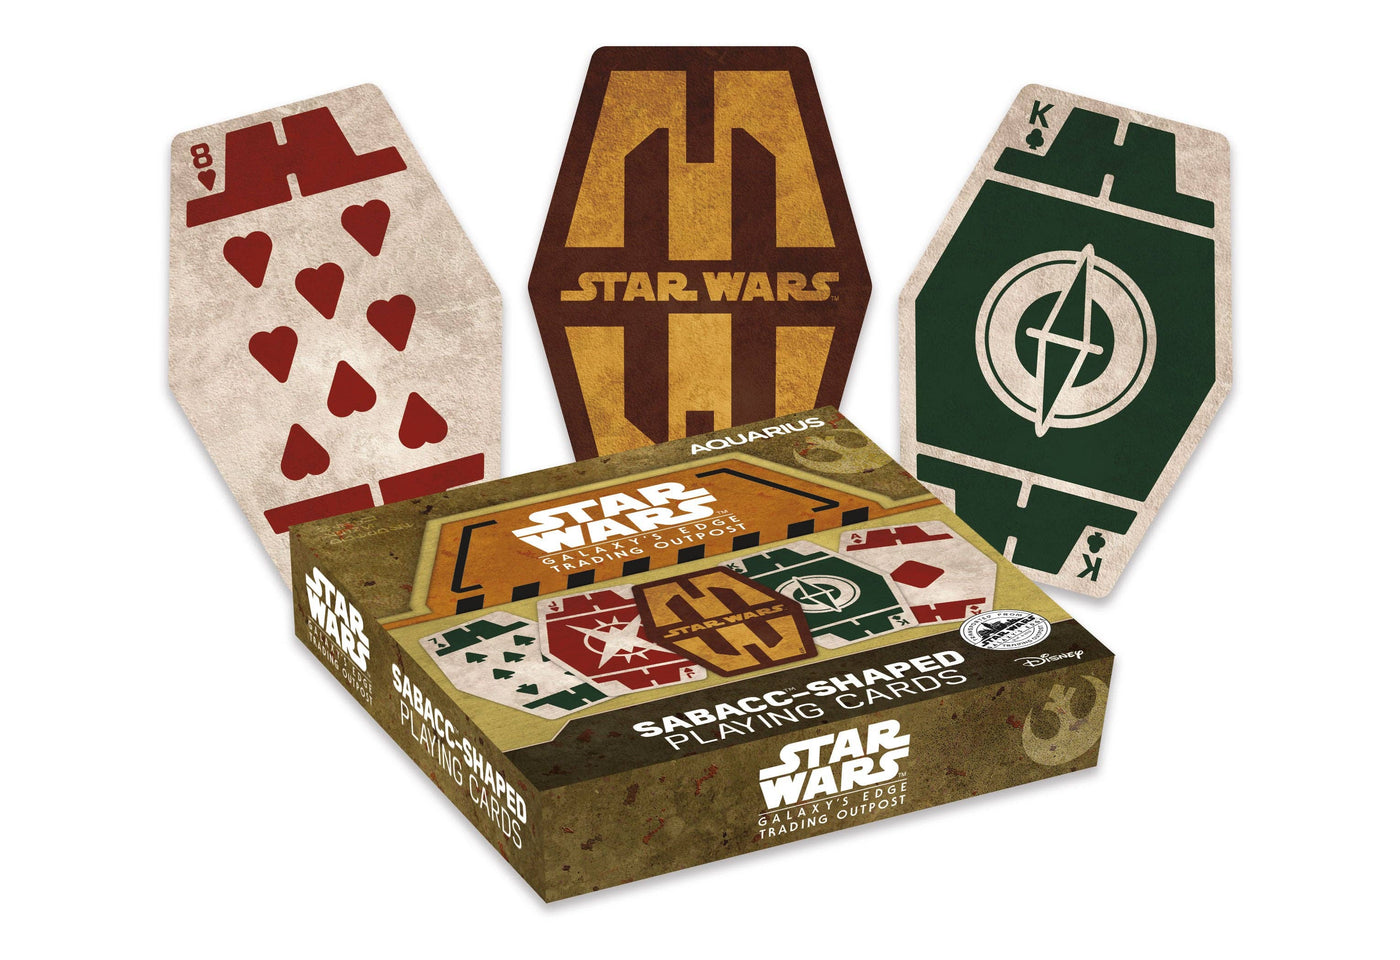 Star Wars Sabacc Shaped Playing Cards 2